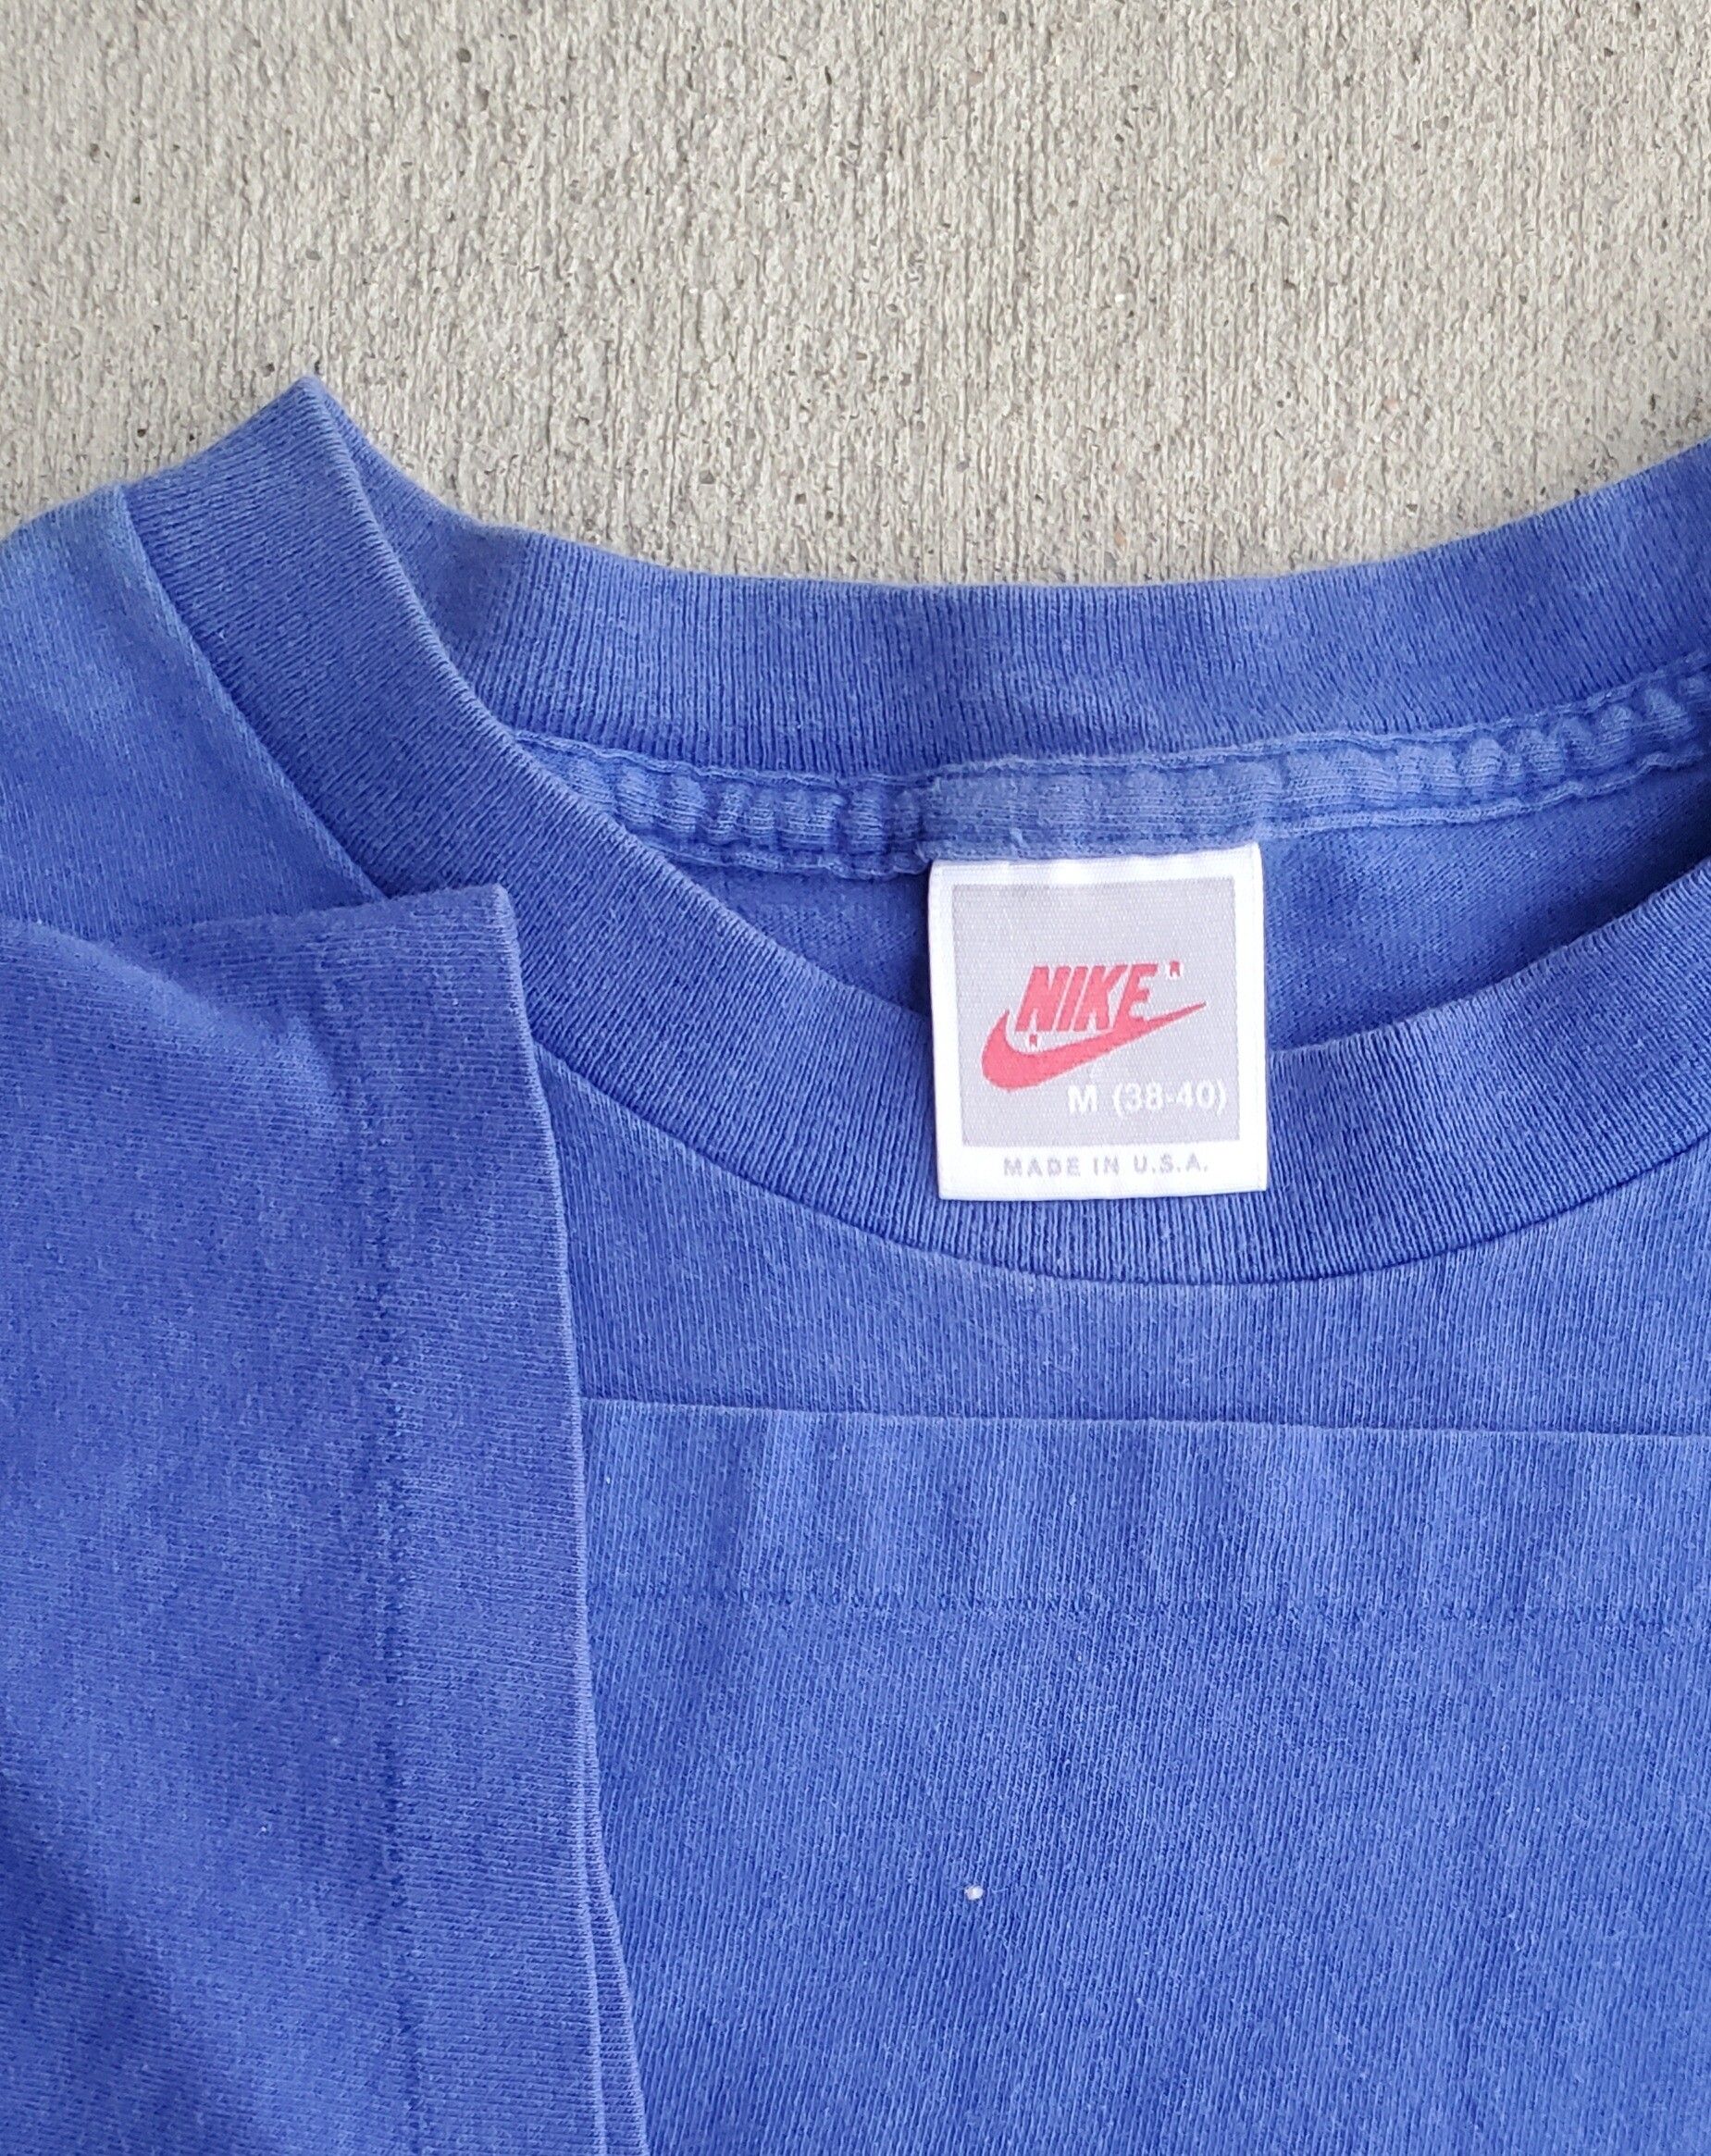 Nike Vintage Late 80s/Early 90s Nike Single Stitch T Shirt Size US M / EU 48-50 / 2 - 5 Preview